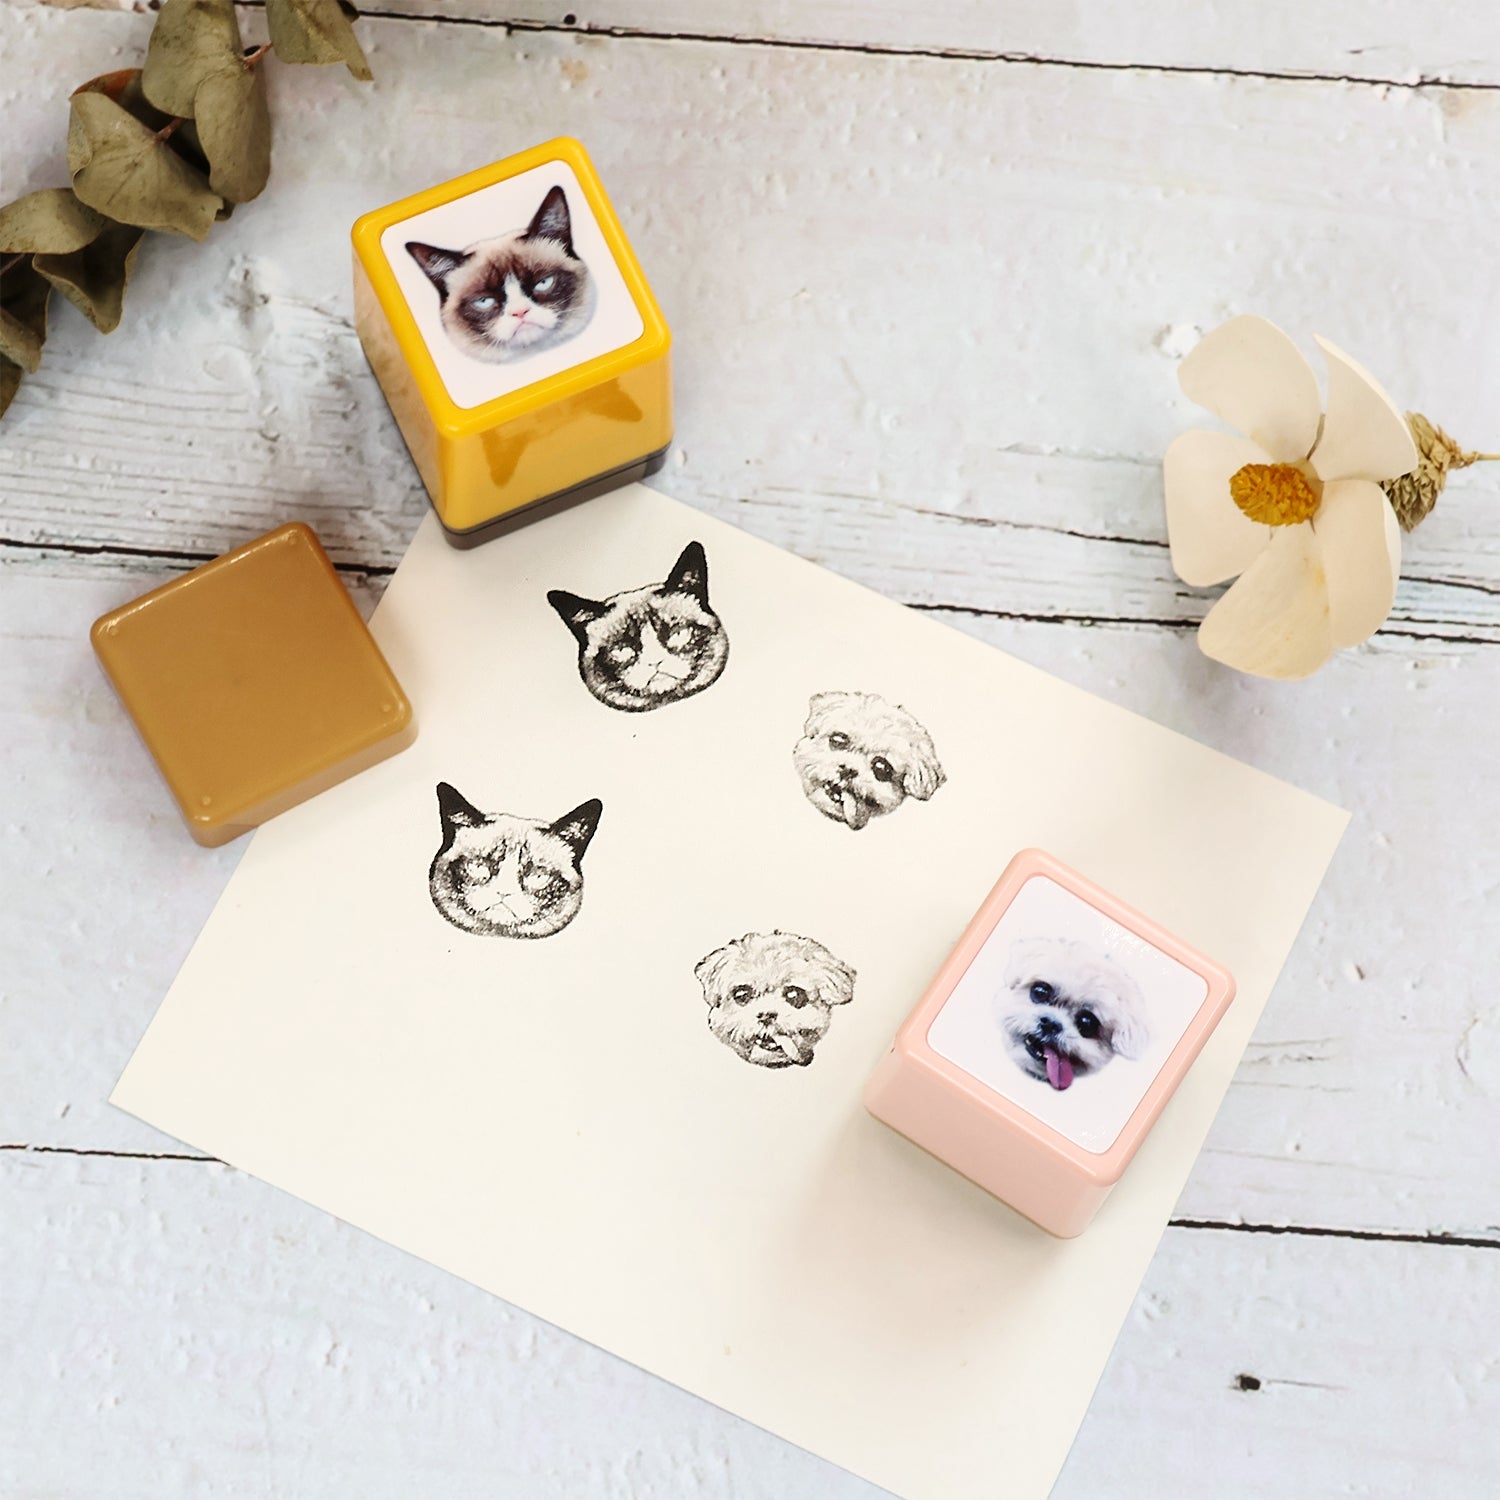 Custom Pet Head Portrait Stamp, Custom Cat & Dog Stamp From Photo, Personalize Stamp on Assignments, Kids Stamp, Valentine's Day Gift 11